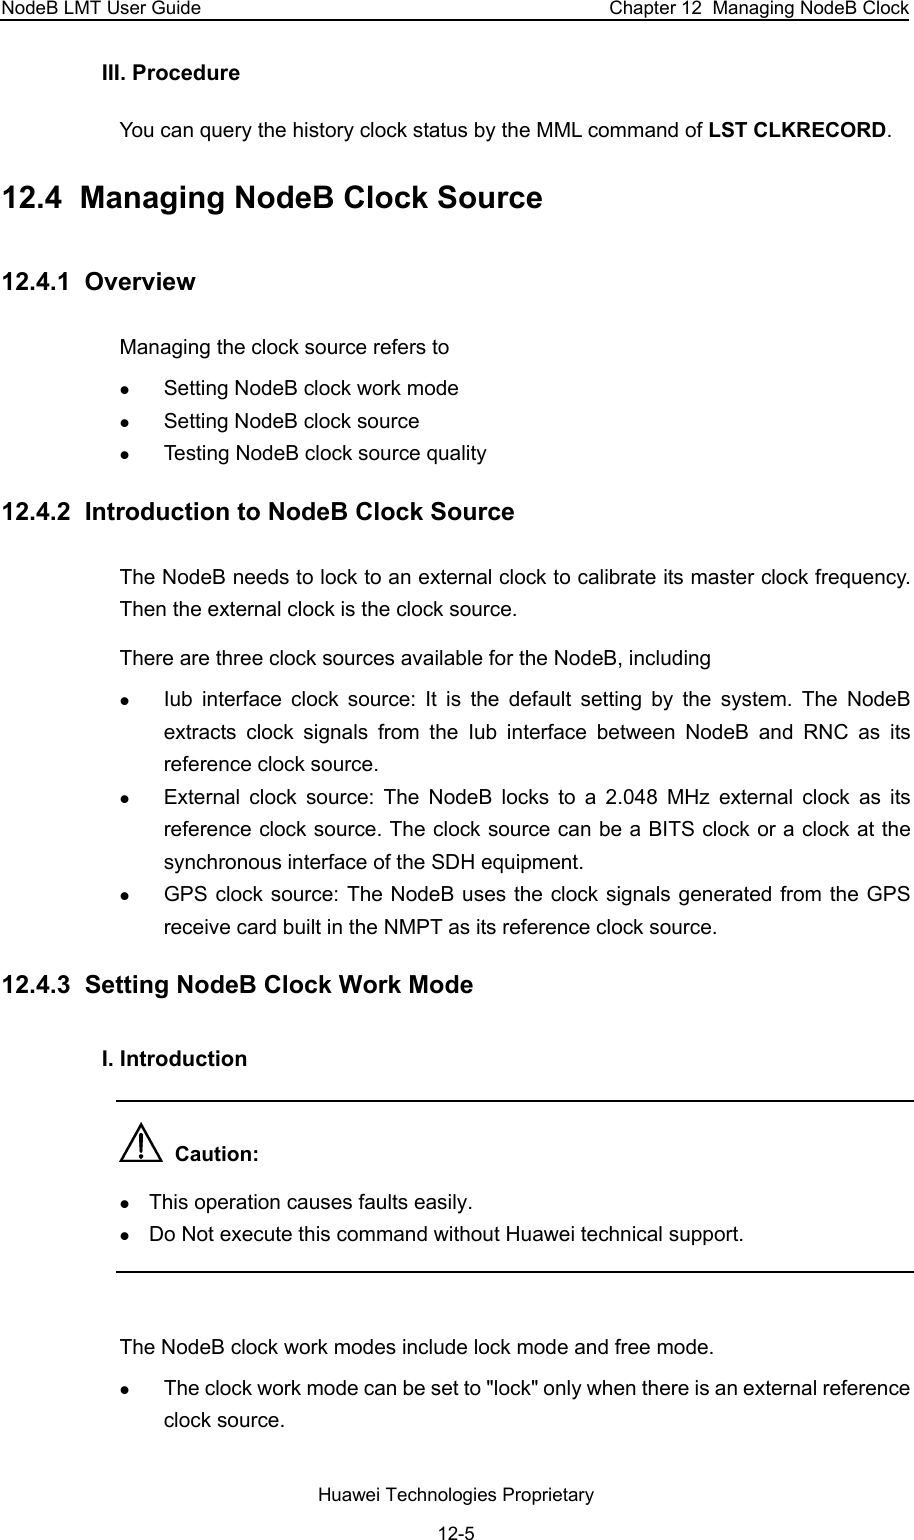 NodeB LMT User Guide  Chapter 12  Managing NodeB Clock III. Procedure You can query the history clock status by the MML command of LST CLKRECORD. 12.4  Managing NodeB Clock Source  12.4.1  Overview Managing the clock source refers to z Setting NodeB clock work mode z Setting NodeB clock source z Testing NodeB clock source quality 12.4.2  Introduction to NodeB Clock Source The NodeB needs to lock to an external clock to calibrate its master clock frequency. Then the external clock is the clock source.  There are three clock sources available for the NodeB, including  z Iub interface clock source: It is the default setting by the system. The NodeB extracts clock signals from the Iub interface between NodeB and RNC as its reference clock source. z External clock source: The NodeB locks to a 2.048 MHz external clock as its reference clock source. The clock source can be a BITS clock or a clock at the synchronous interface of the SDH equipment. z GPS clock source: The NodeB uses the clock signals generated from the GPS receive card built in the NMPT as its reference clock source.  12.4.3  Setting NodeB Clock Work Mode I. Introduction   Caution:  z This operation causes faults easily.  z Do Not execute this command without Huawei technical support.  The NodeB clock work modes include lock mode and free mode. z The clock work mode can be set to &quot;lock&quot; only when there is an external reference clock source.  Huawei Technologies Proprietary 12-5 